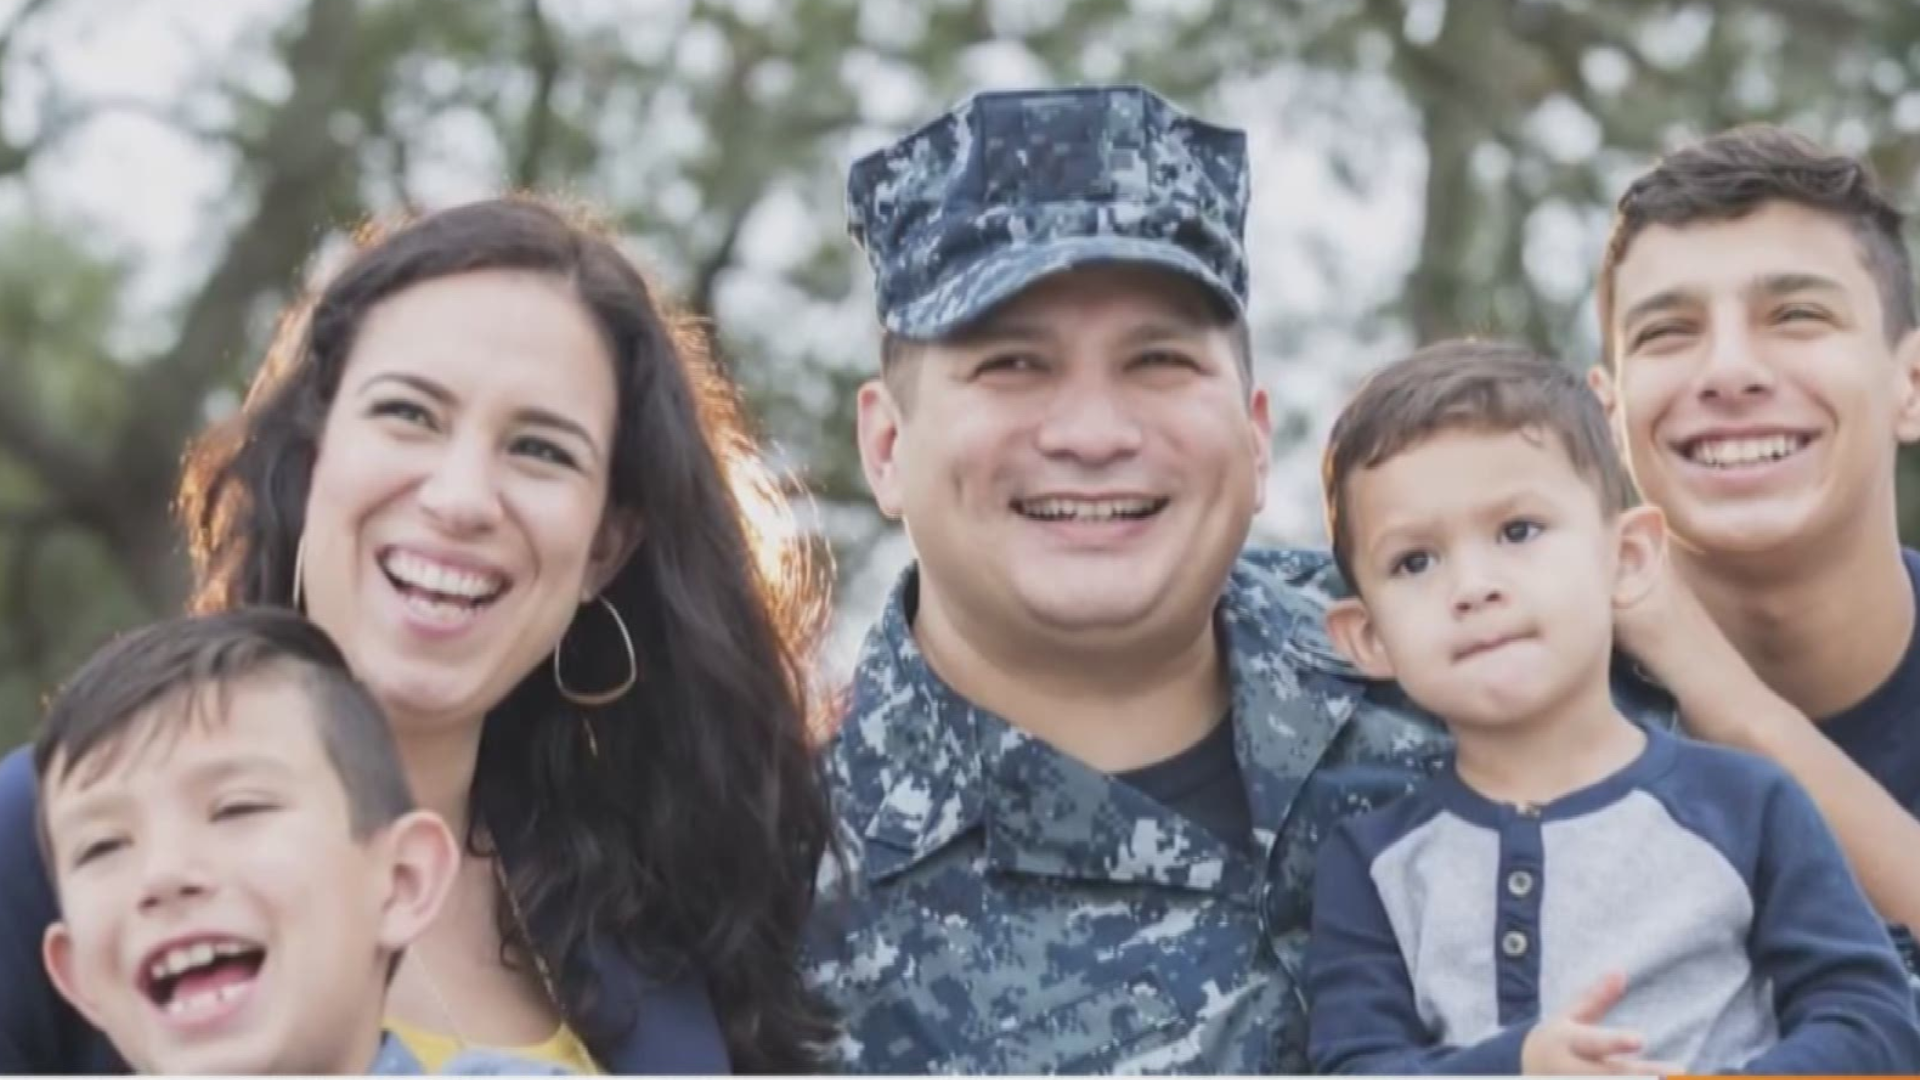 Sue Hoppin, founder and president of National Military Spouse Network, has five tips for eliminating employment barriers for military spouses to become entrepreneurs.